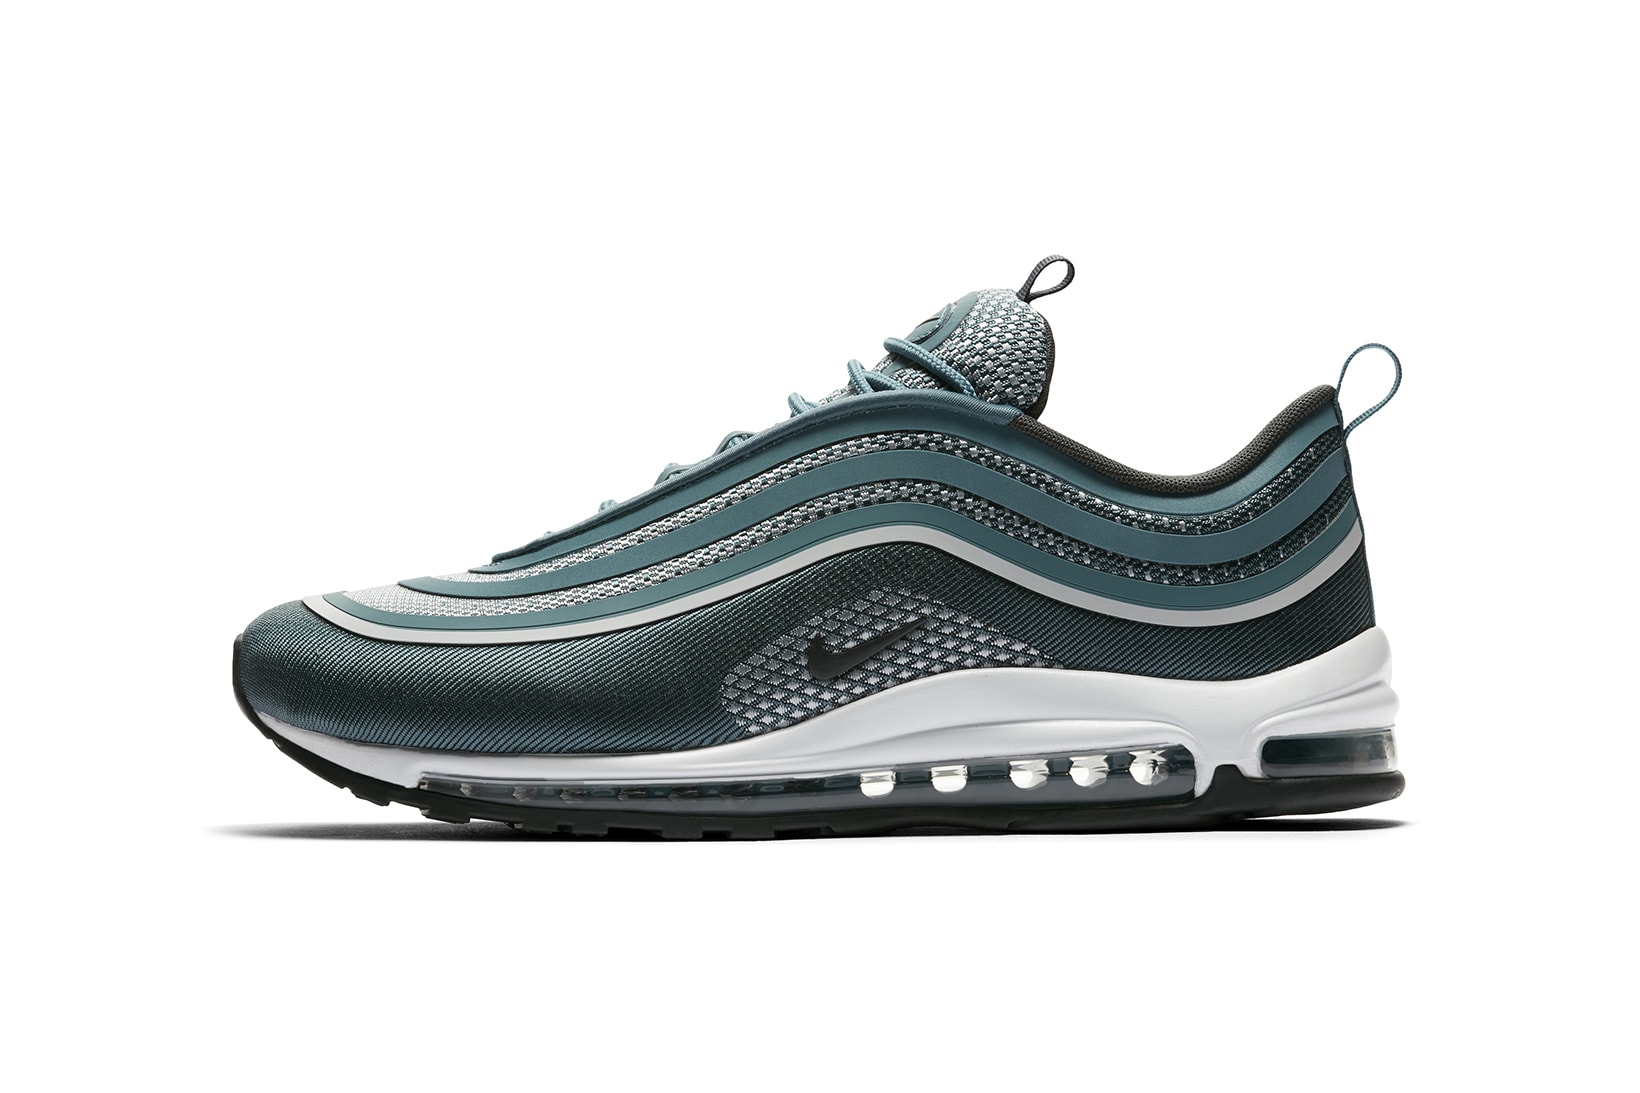 Nike Air Max 97 Ultra 2017 Fall Releases Colorways Sneakers Shoes Footwear August 17 5 Release Date Info